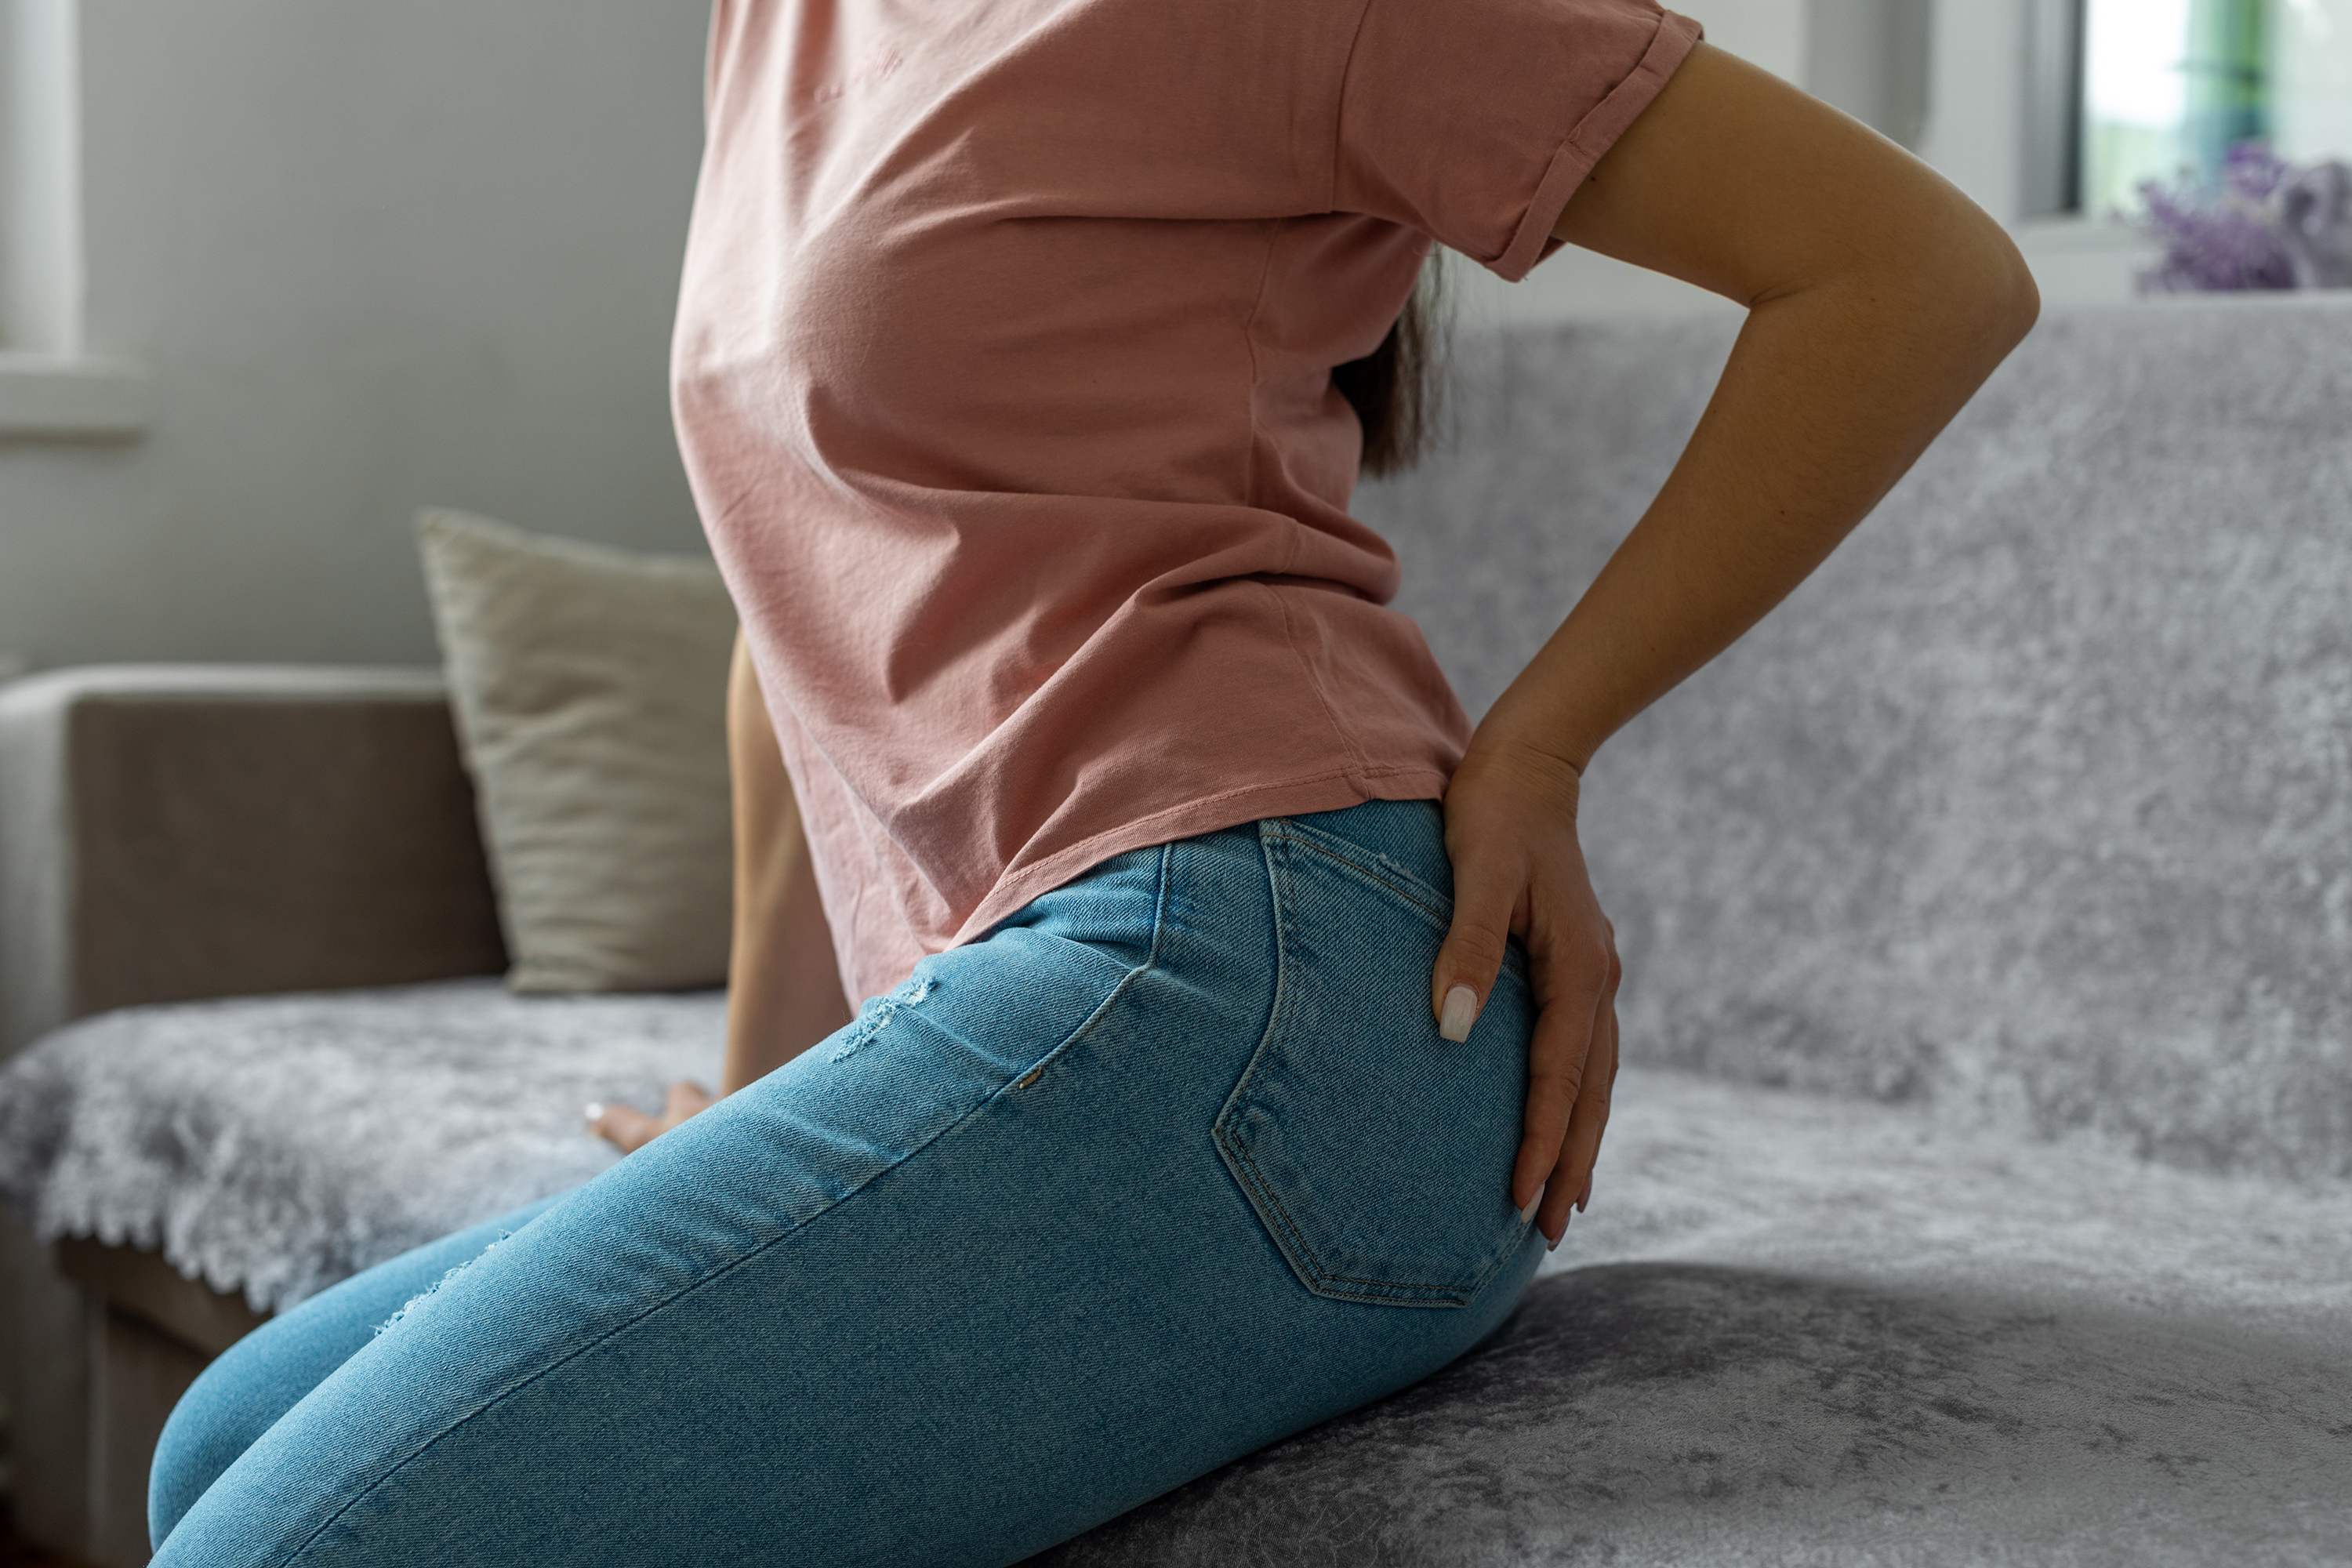 What Does Piriformis Syndrome Feel Like